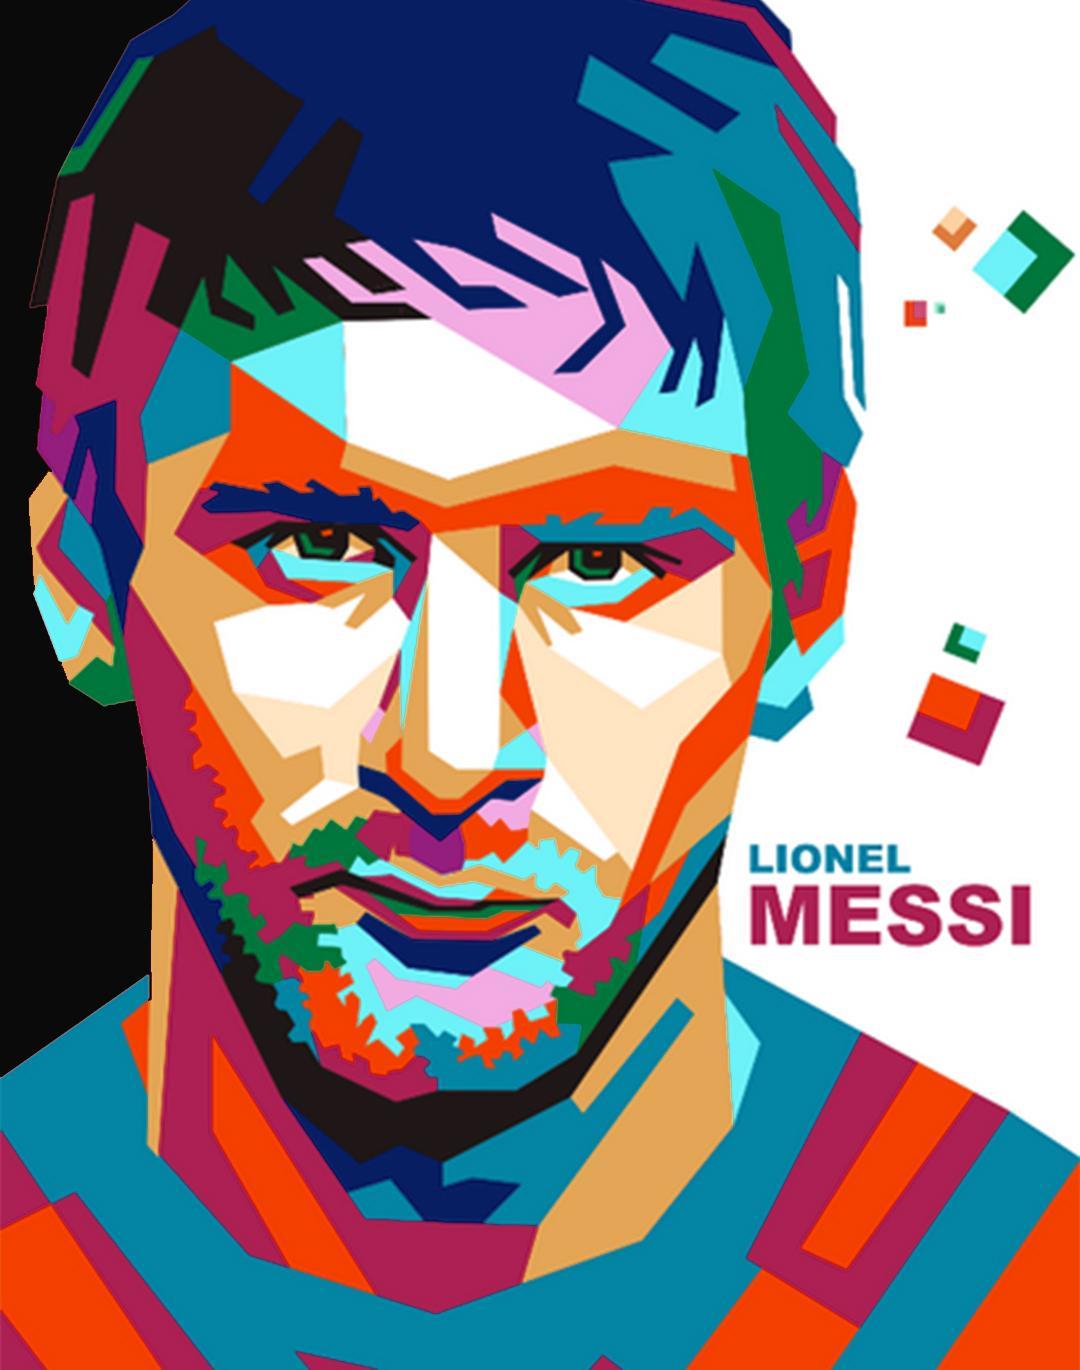 Lionel Messi Wallpaper for Android